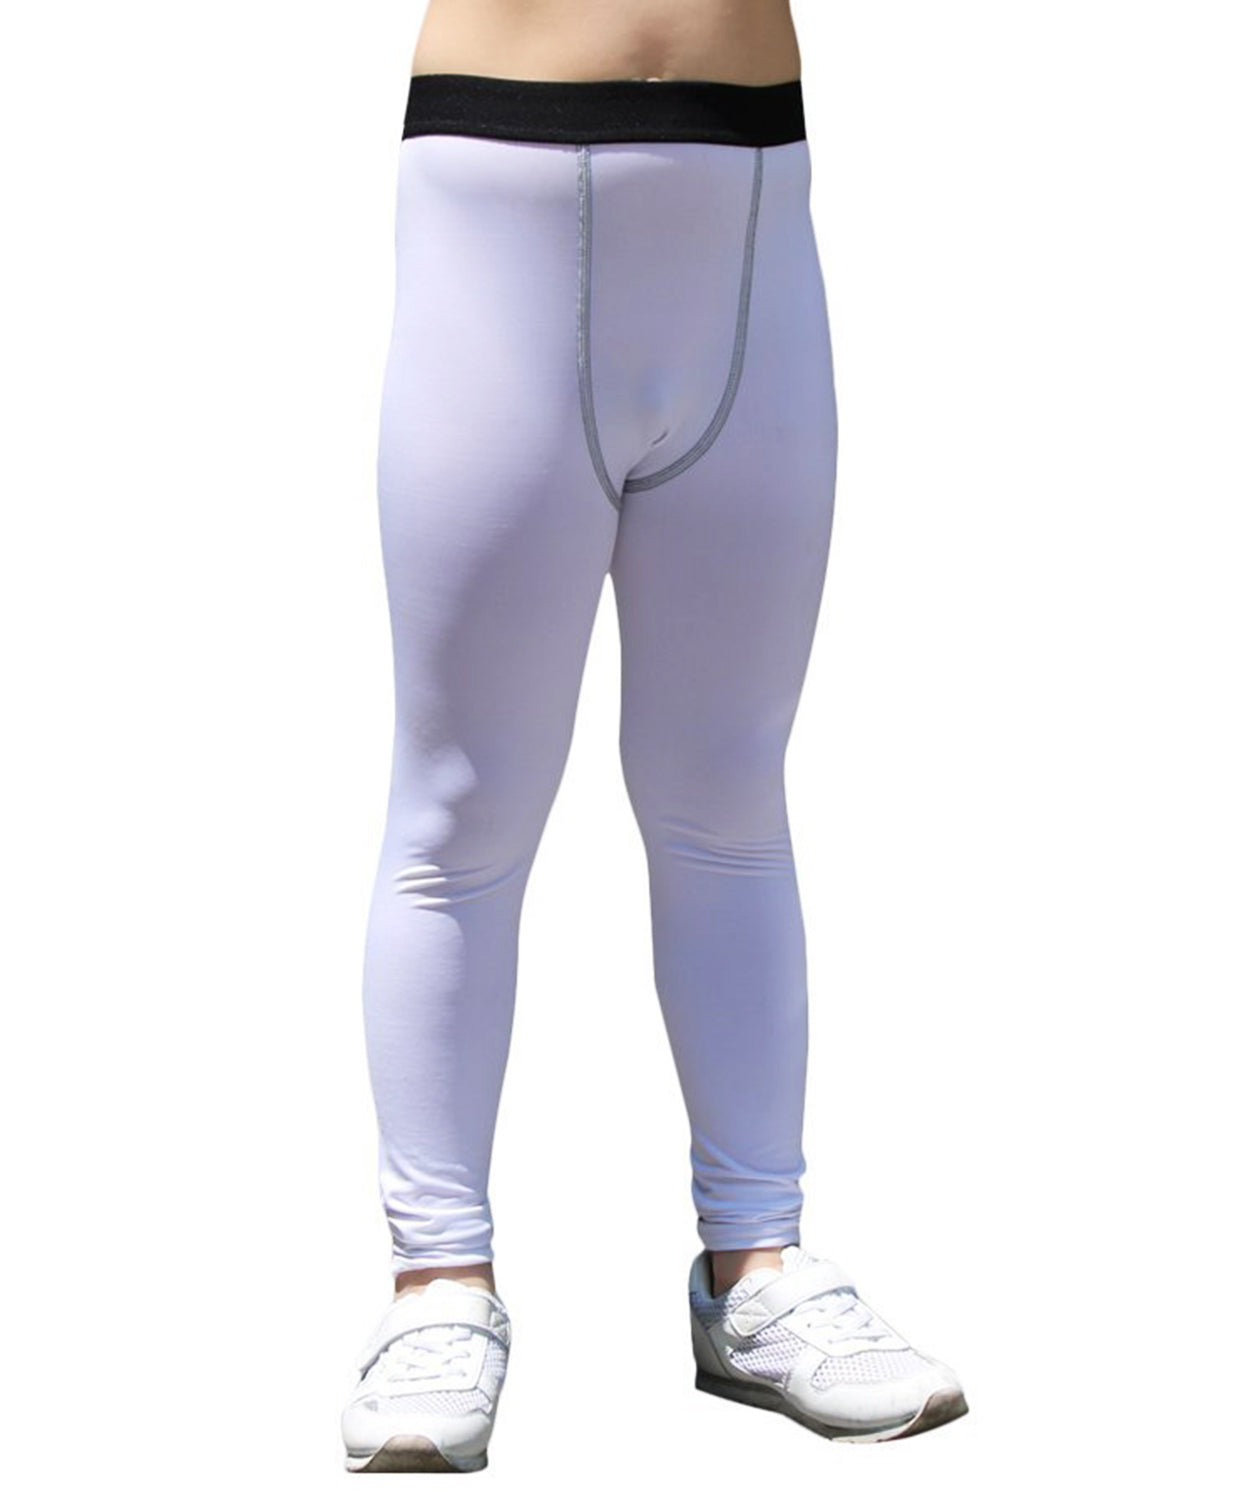 Youth Boys' Compression Baselayer, Base Sport Basketball Tights Athletic  Leggings Thermal 